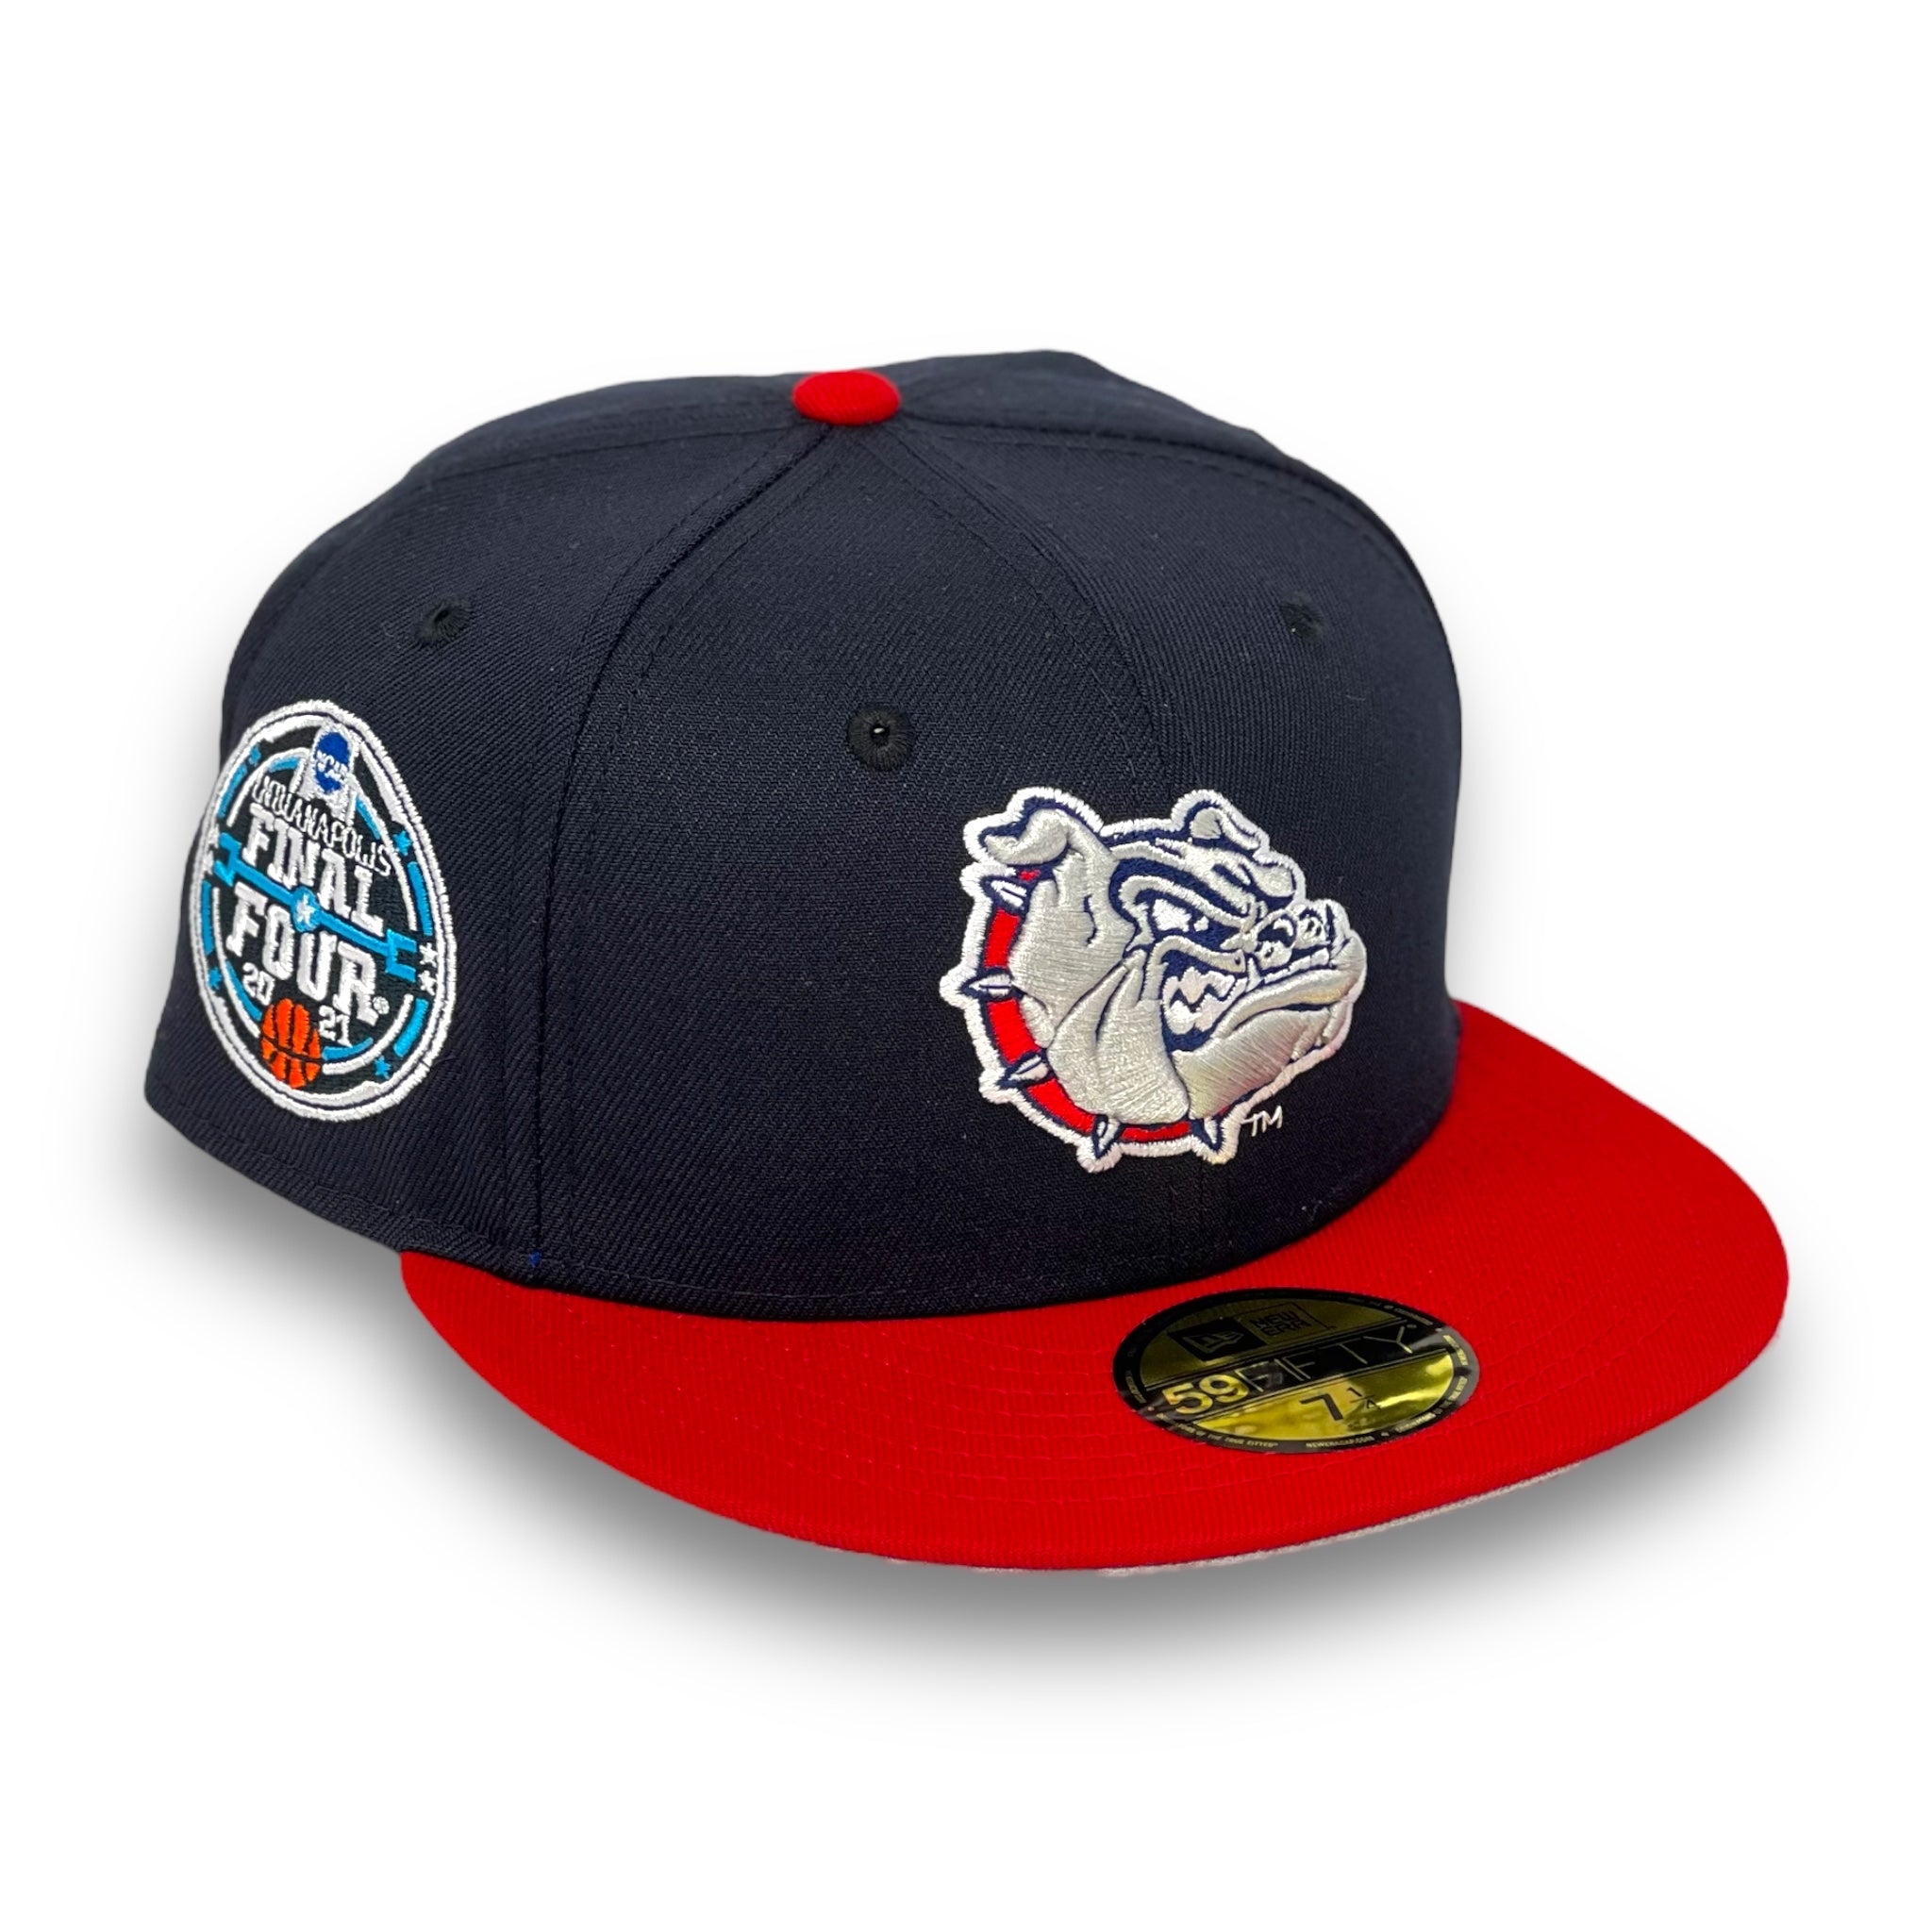 GONZAGA BULLDOGS (2021 FINAL FOUR) NEW ERA 59FIFTY FITTED